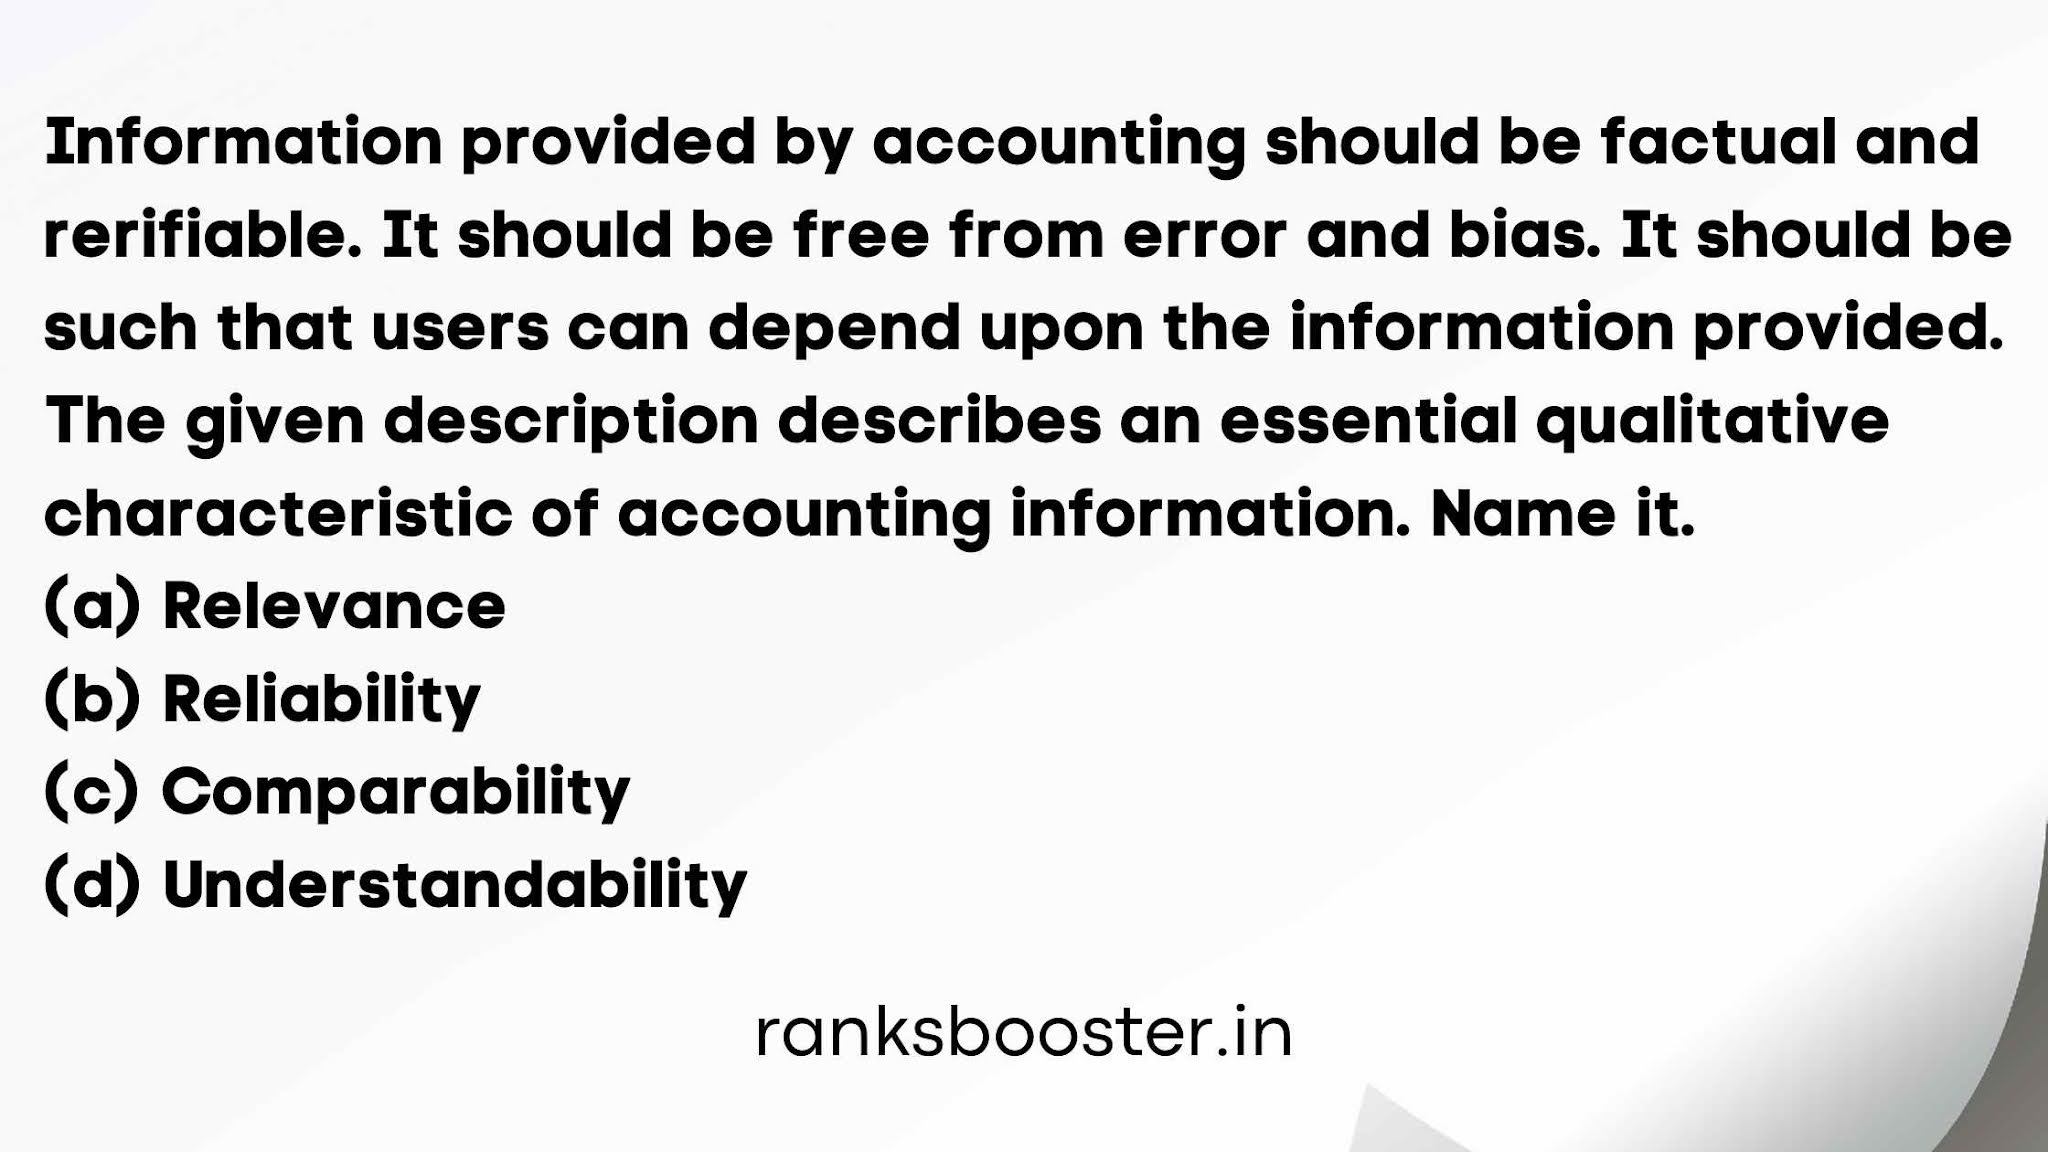 Information provided by accounting should be factual and rerifiable. It should be free from error and bias. It should be such that users can depend upon the information provided.